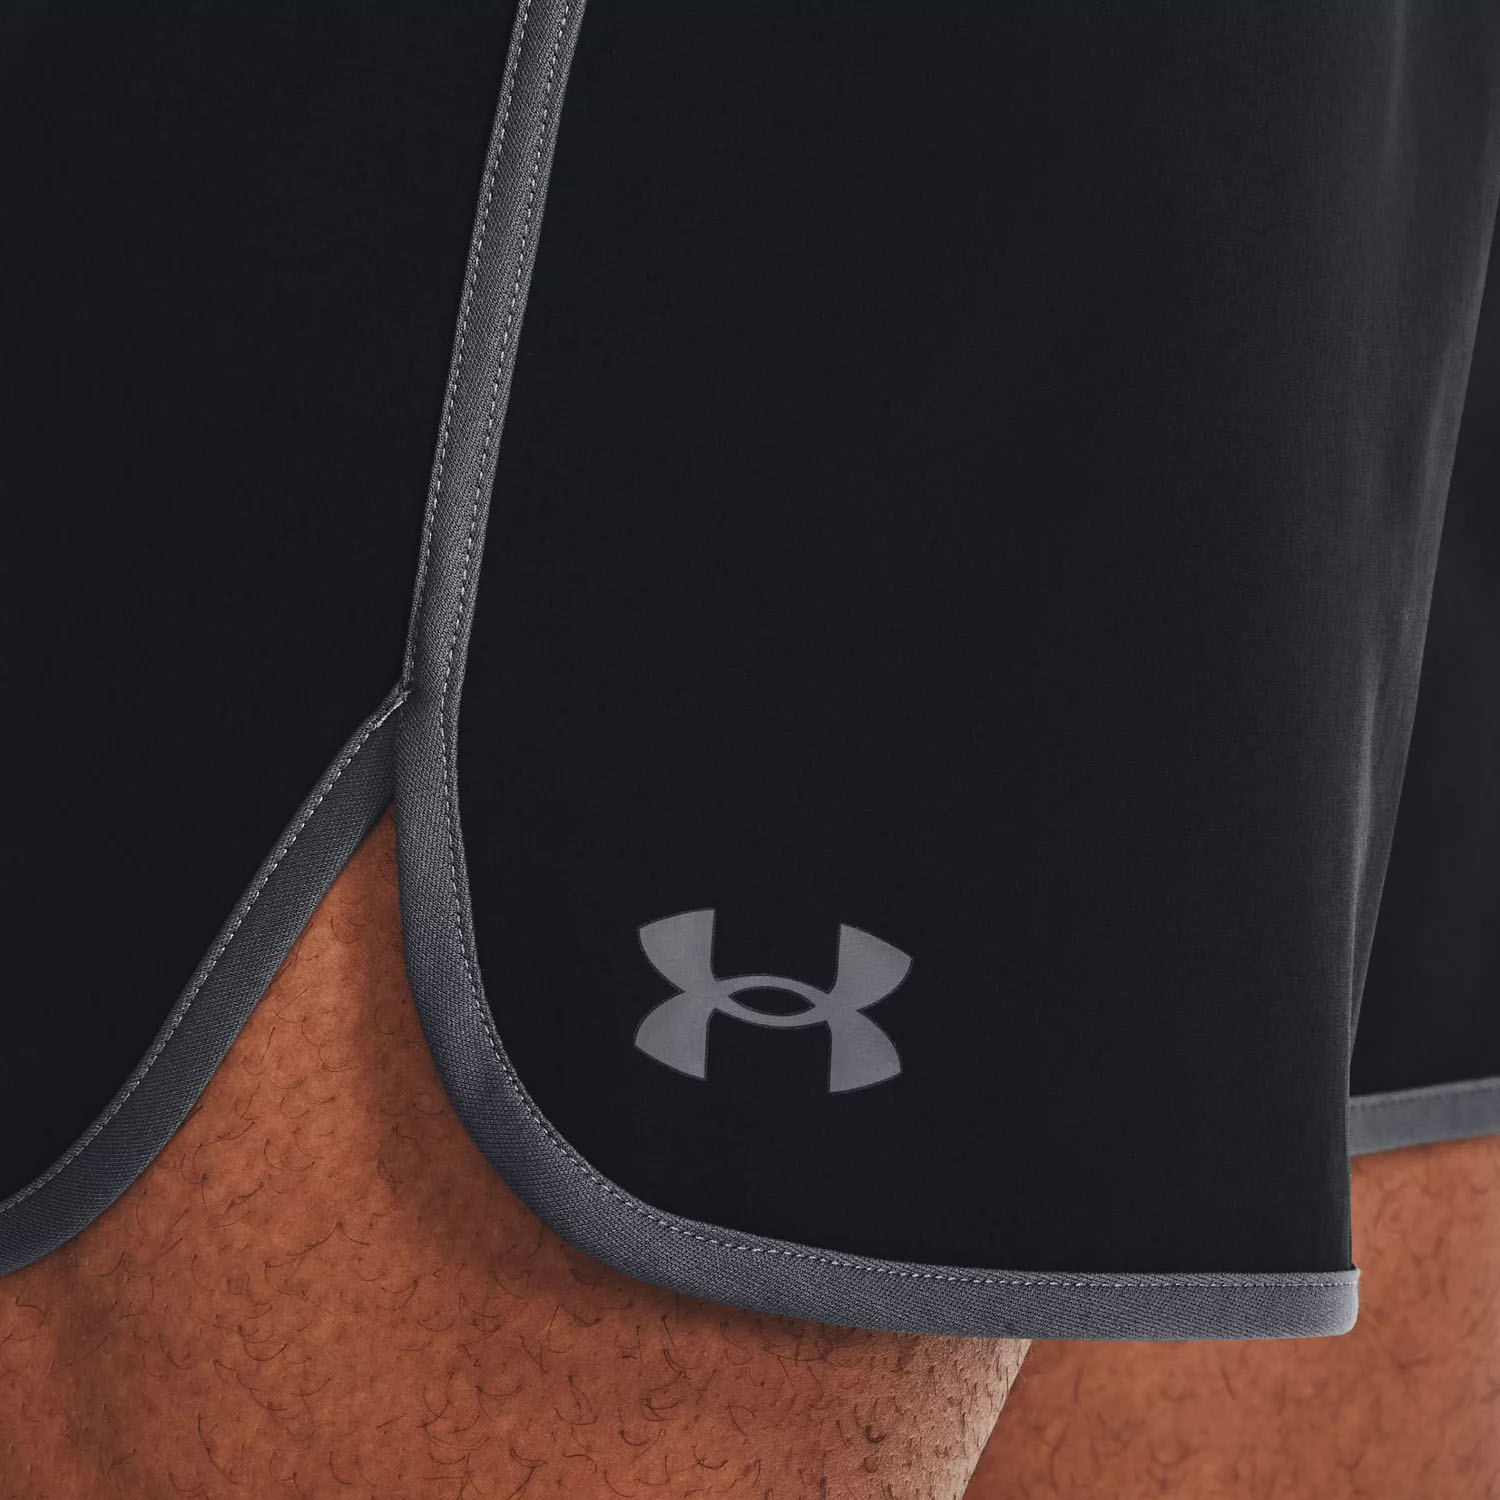 Under Armour HIIT Woven 8in Shorts - Black/Pitch Gray